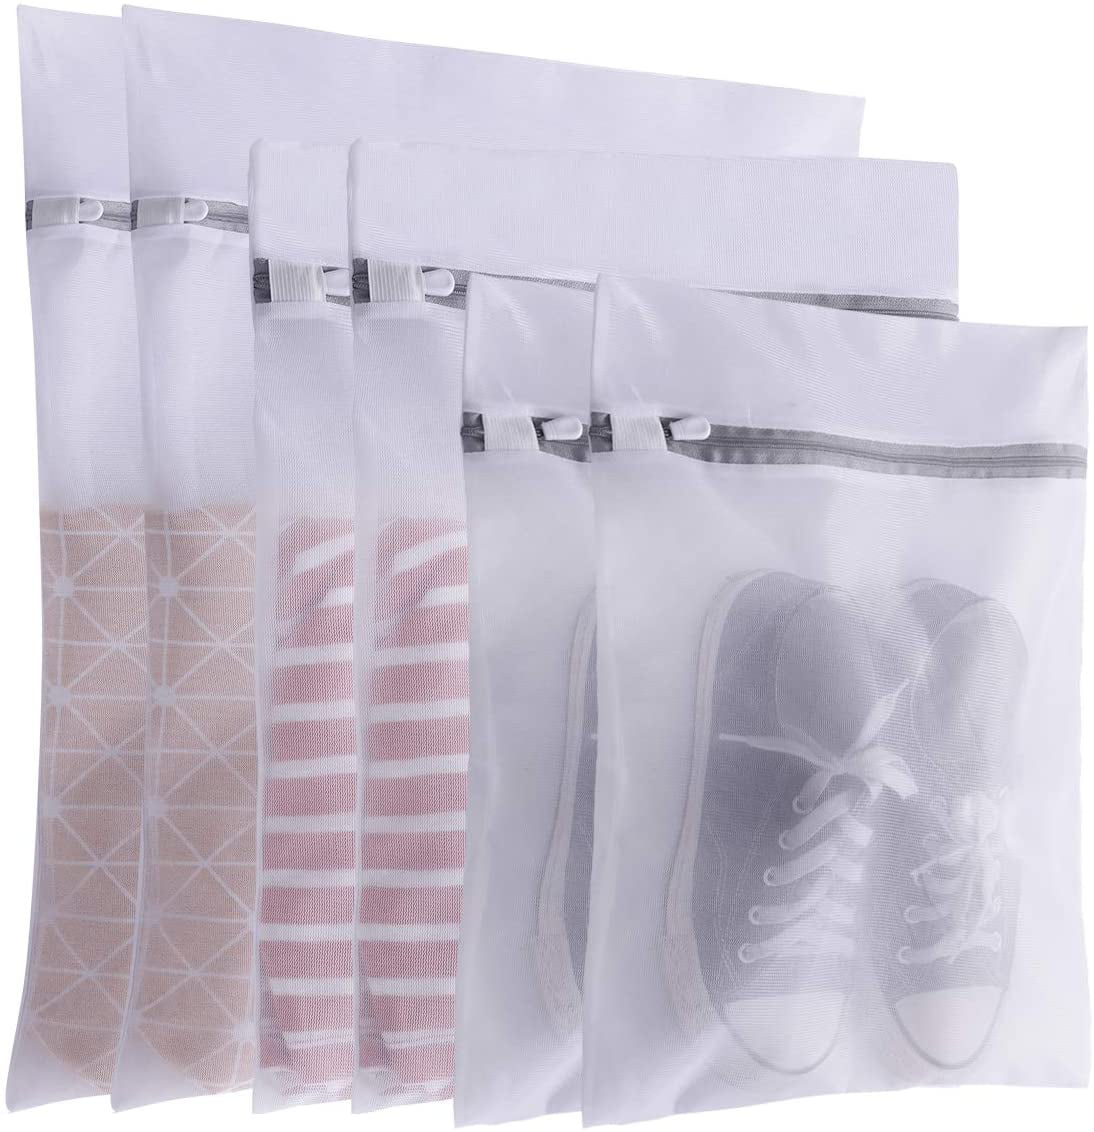 Reusable and Durable Laundry Bags with Zips Jackets Socks Pants Sweaters 4PCS Mesh Laundry Bags 2 Sizes-60*60cm/60*50cm Washing Bags for Quilt Cover,T-shirt Large Laundry Bags Dress